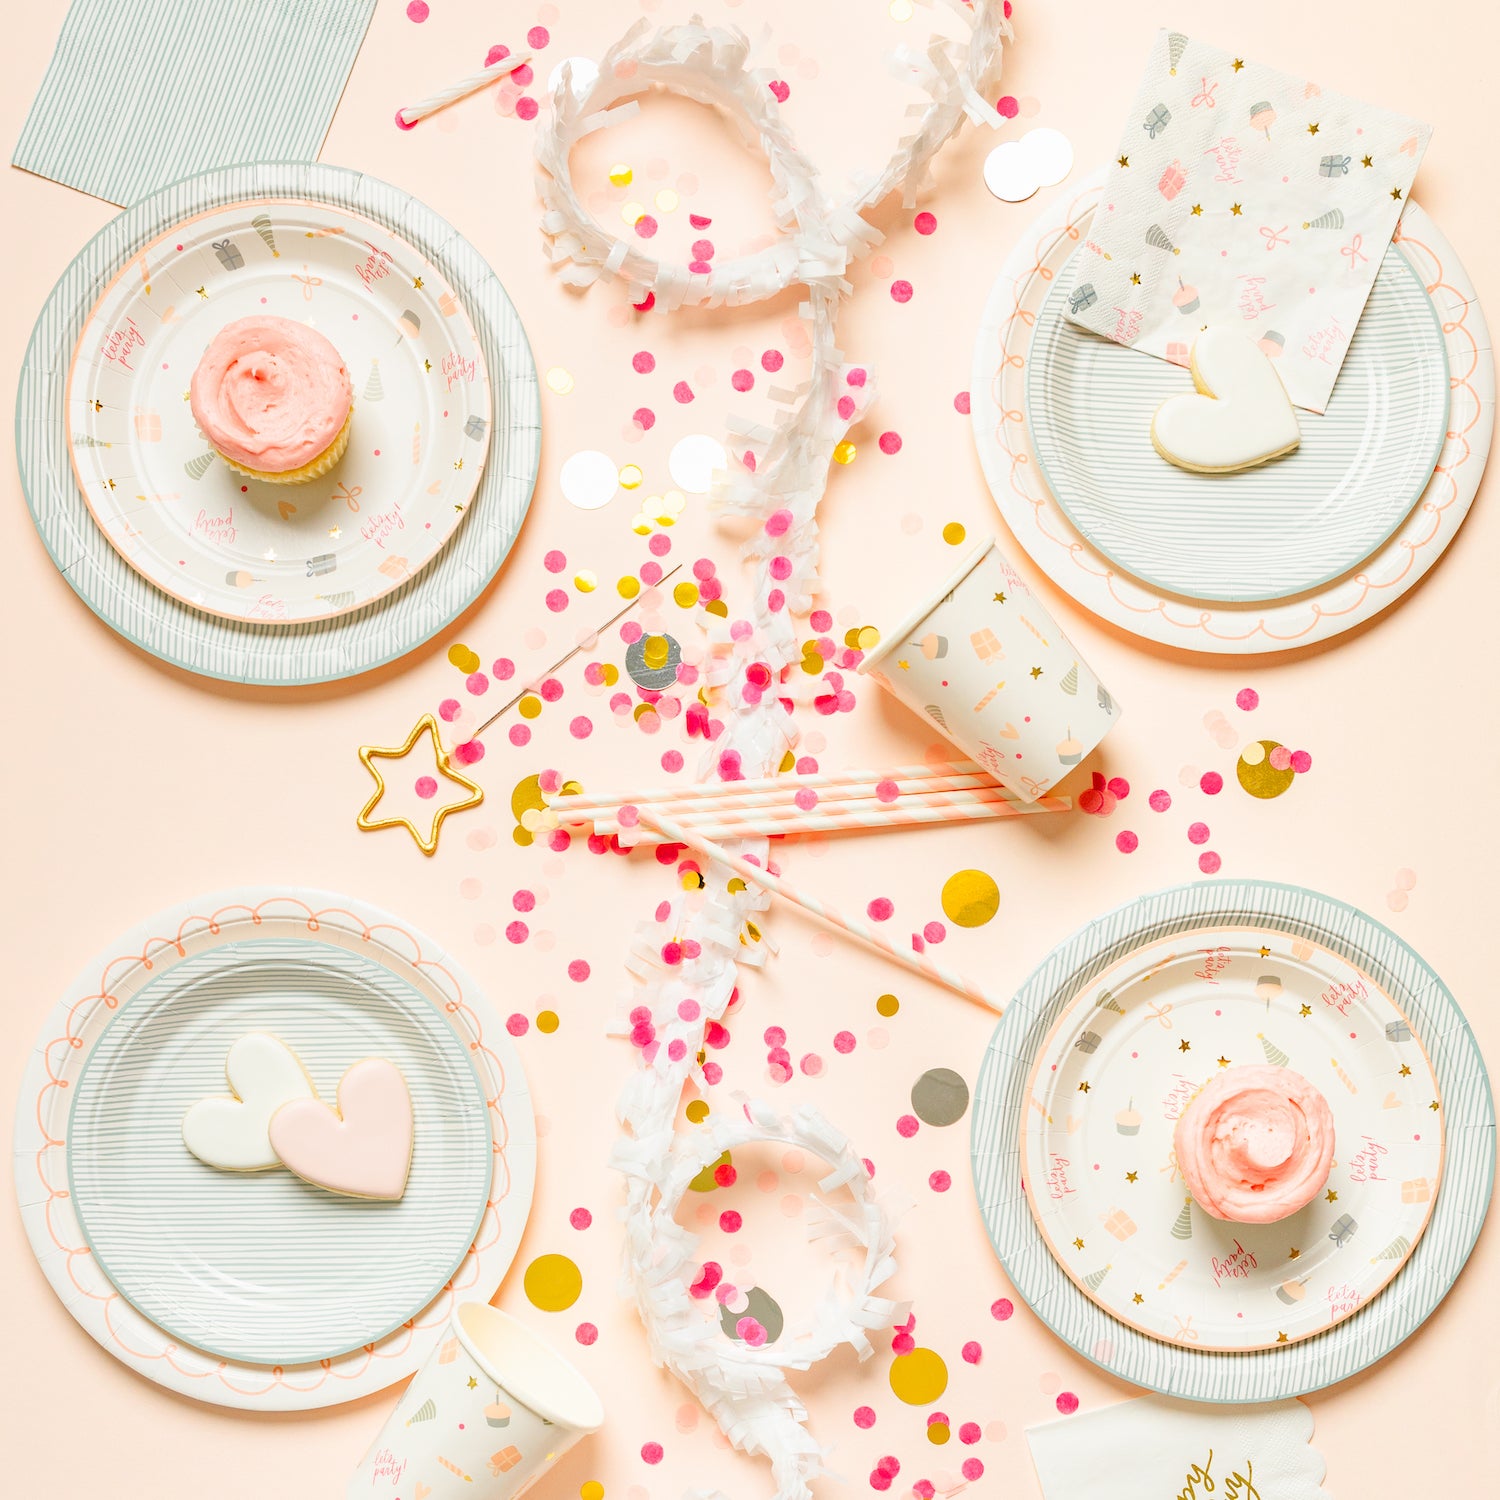 Birthday party tablescape with mixed patterns in blue white pink and gold